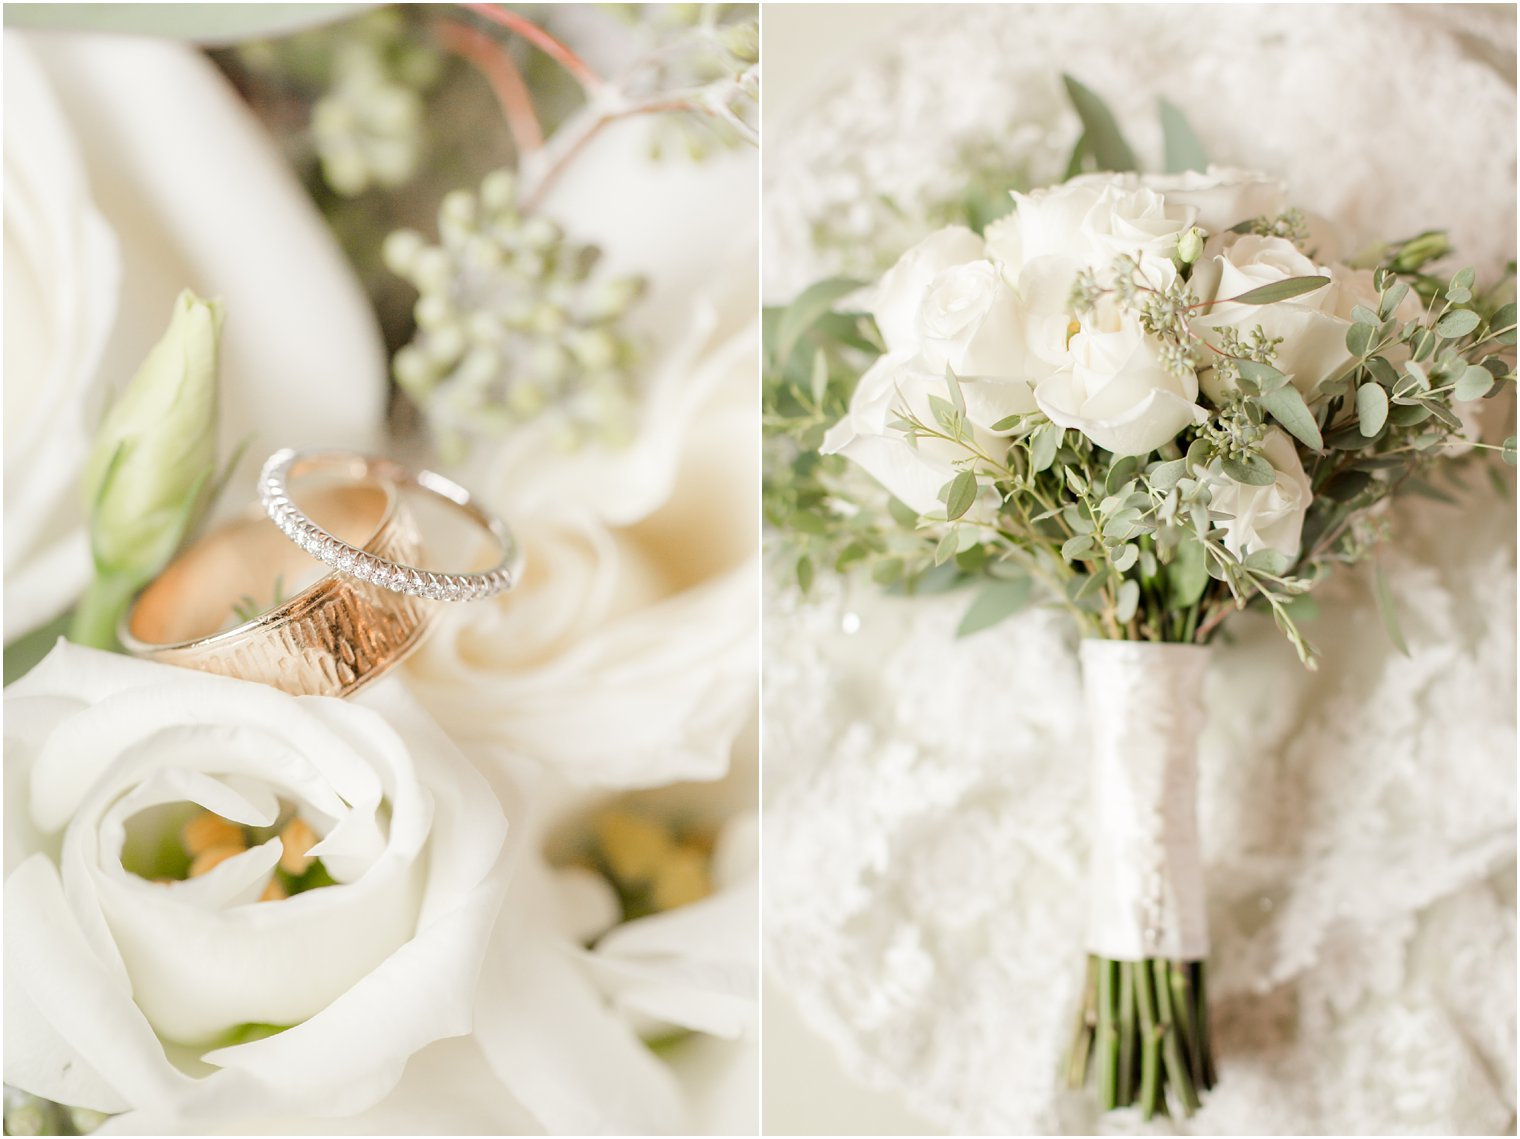 Ivory rose and greenery detailed wedding bouquet by Park Floral photographed by Idalia Photography